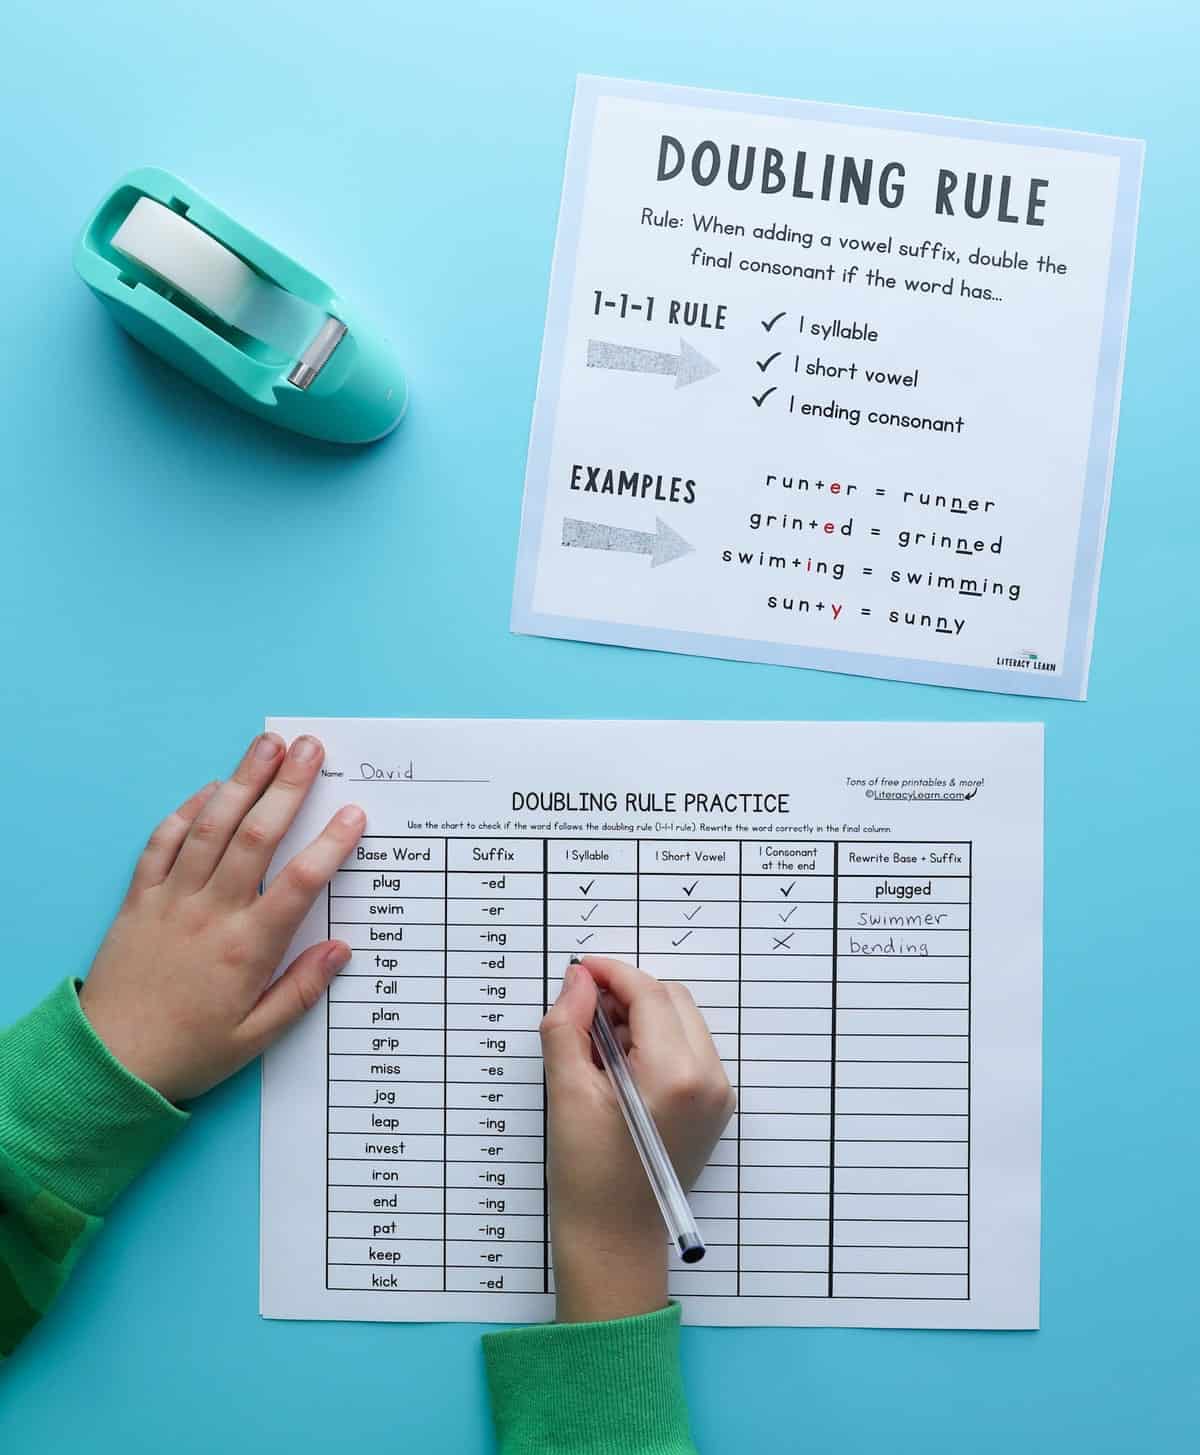 Photo showing child's hands completing the Doubling Rule worksheet along with the graphic for support.